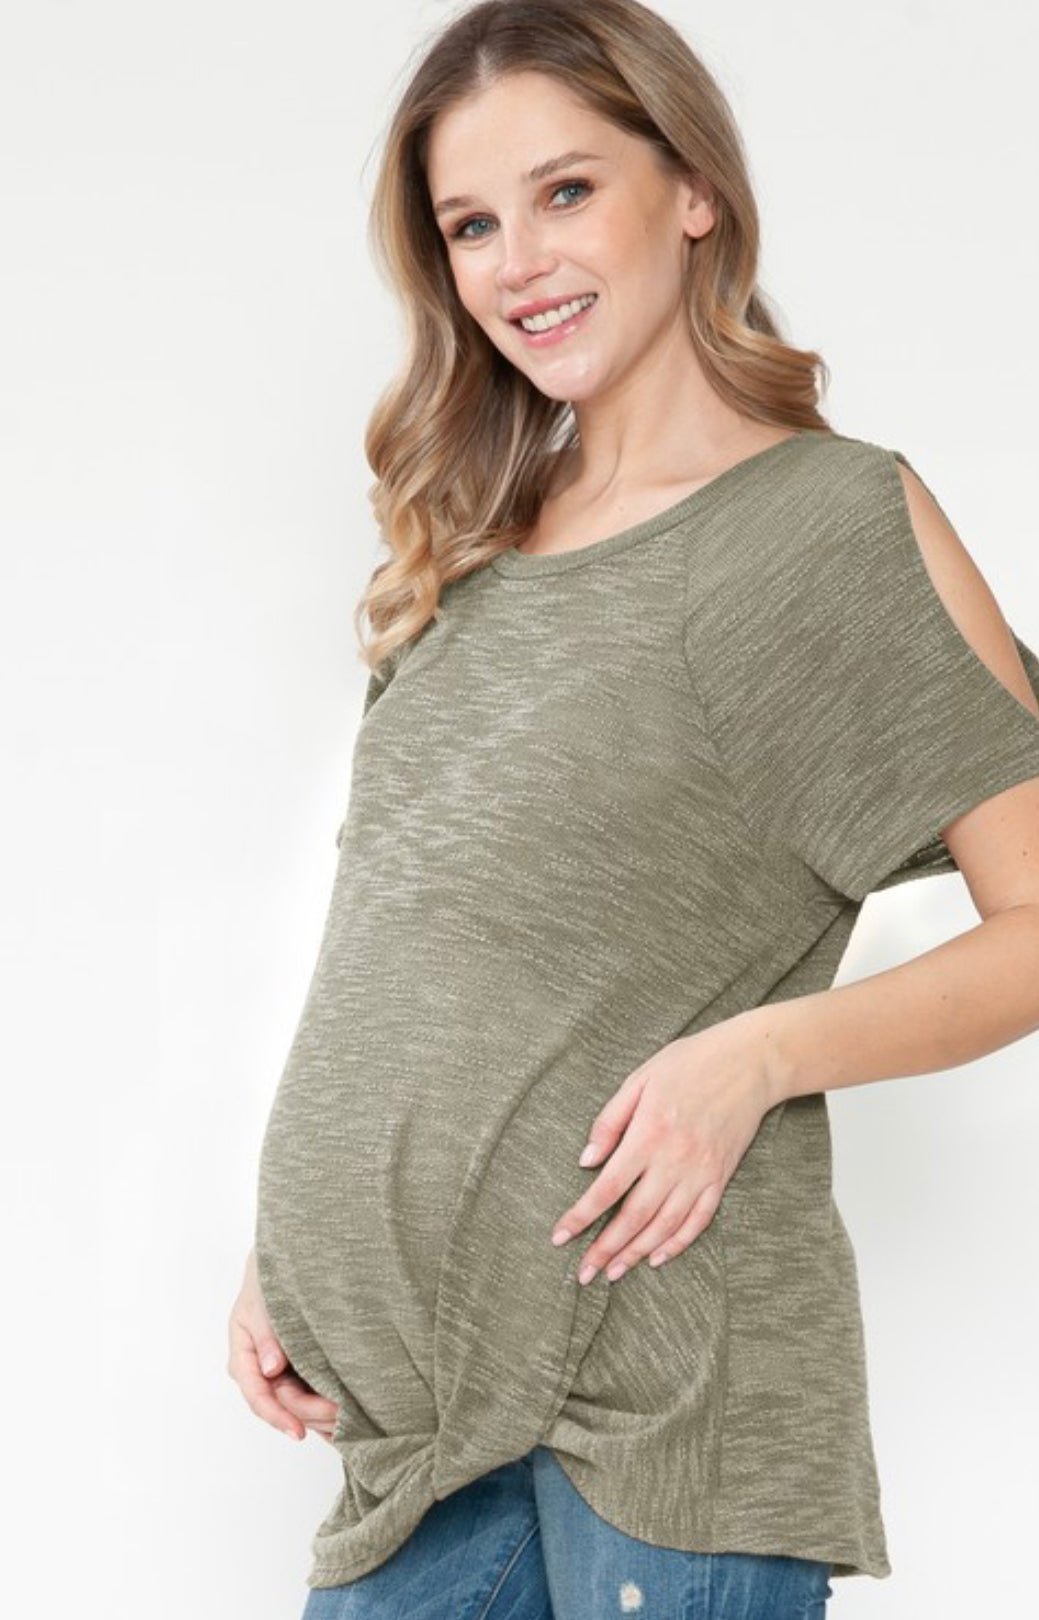 Low Knot Top in Olive - The Bump & Company LLC